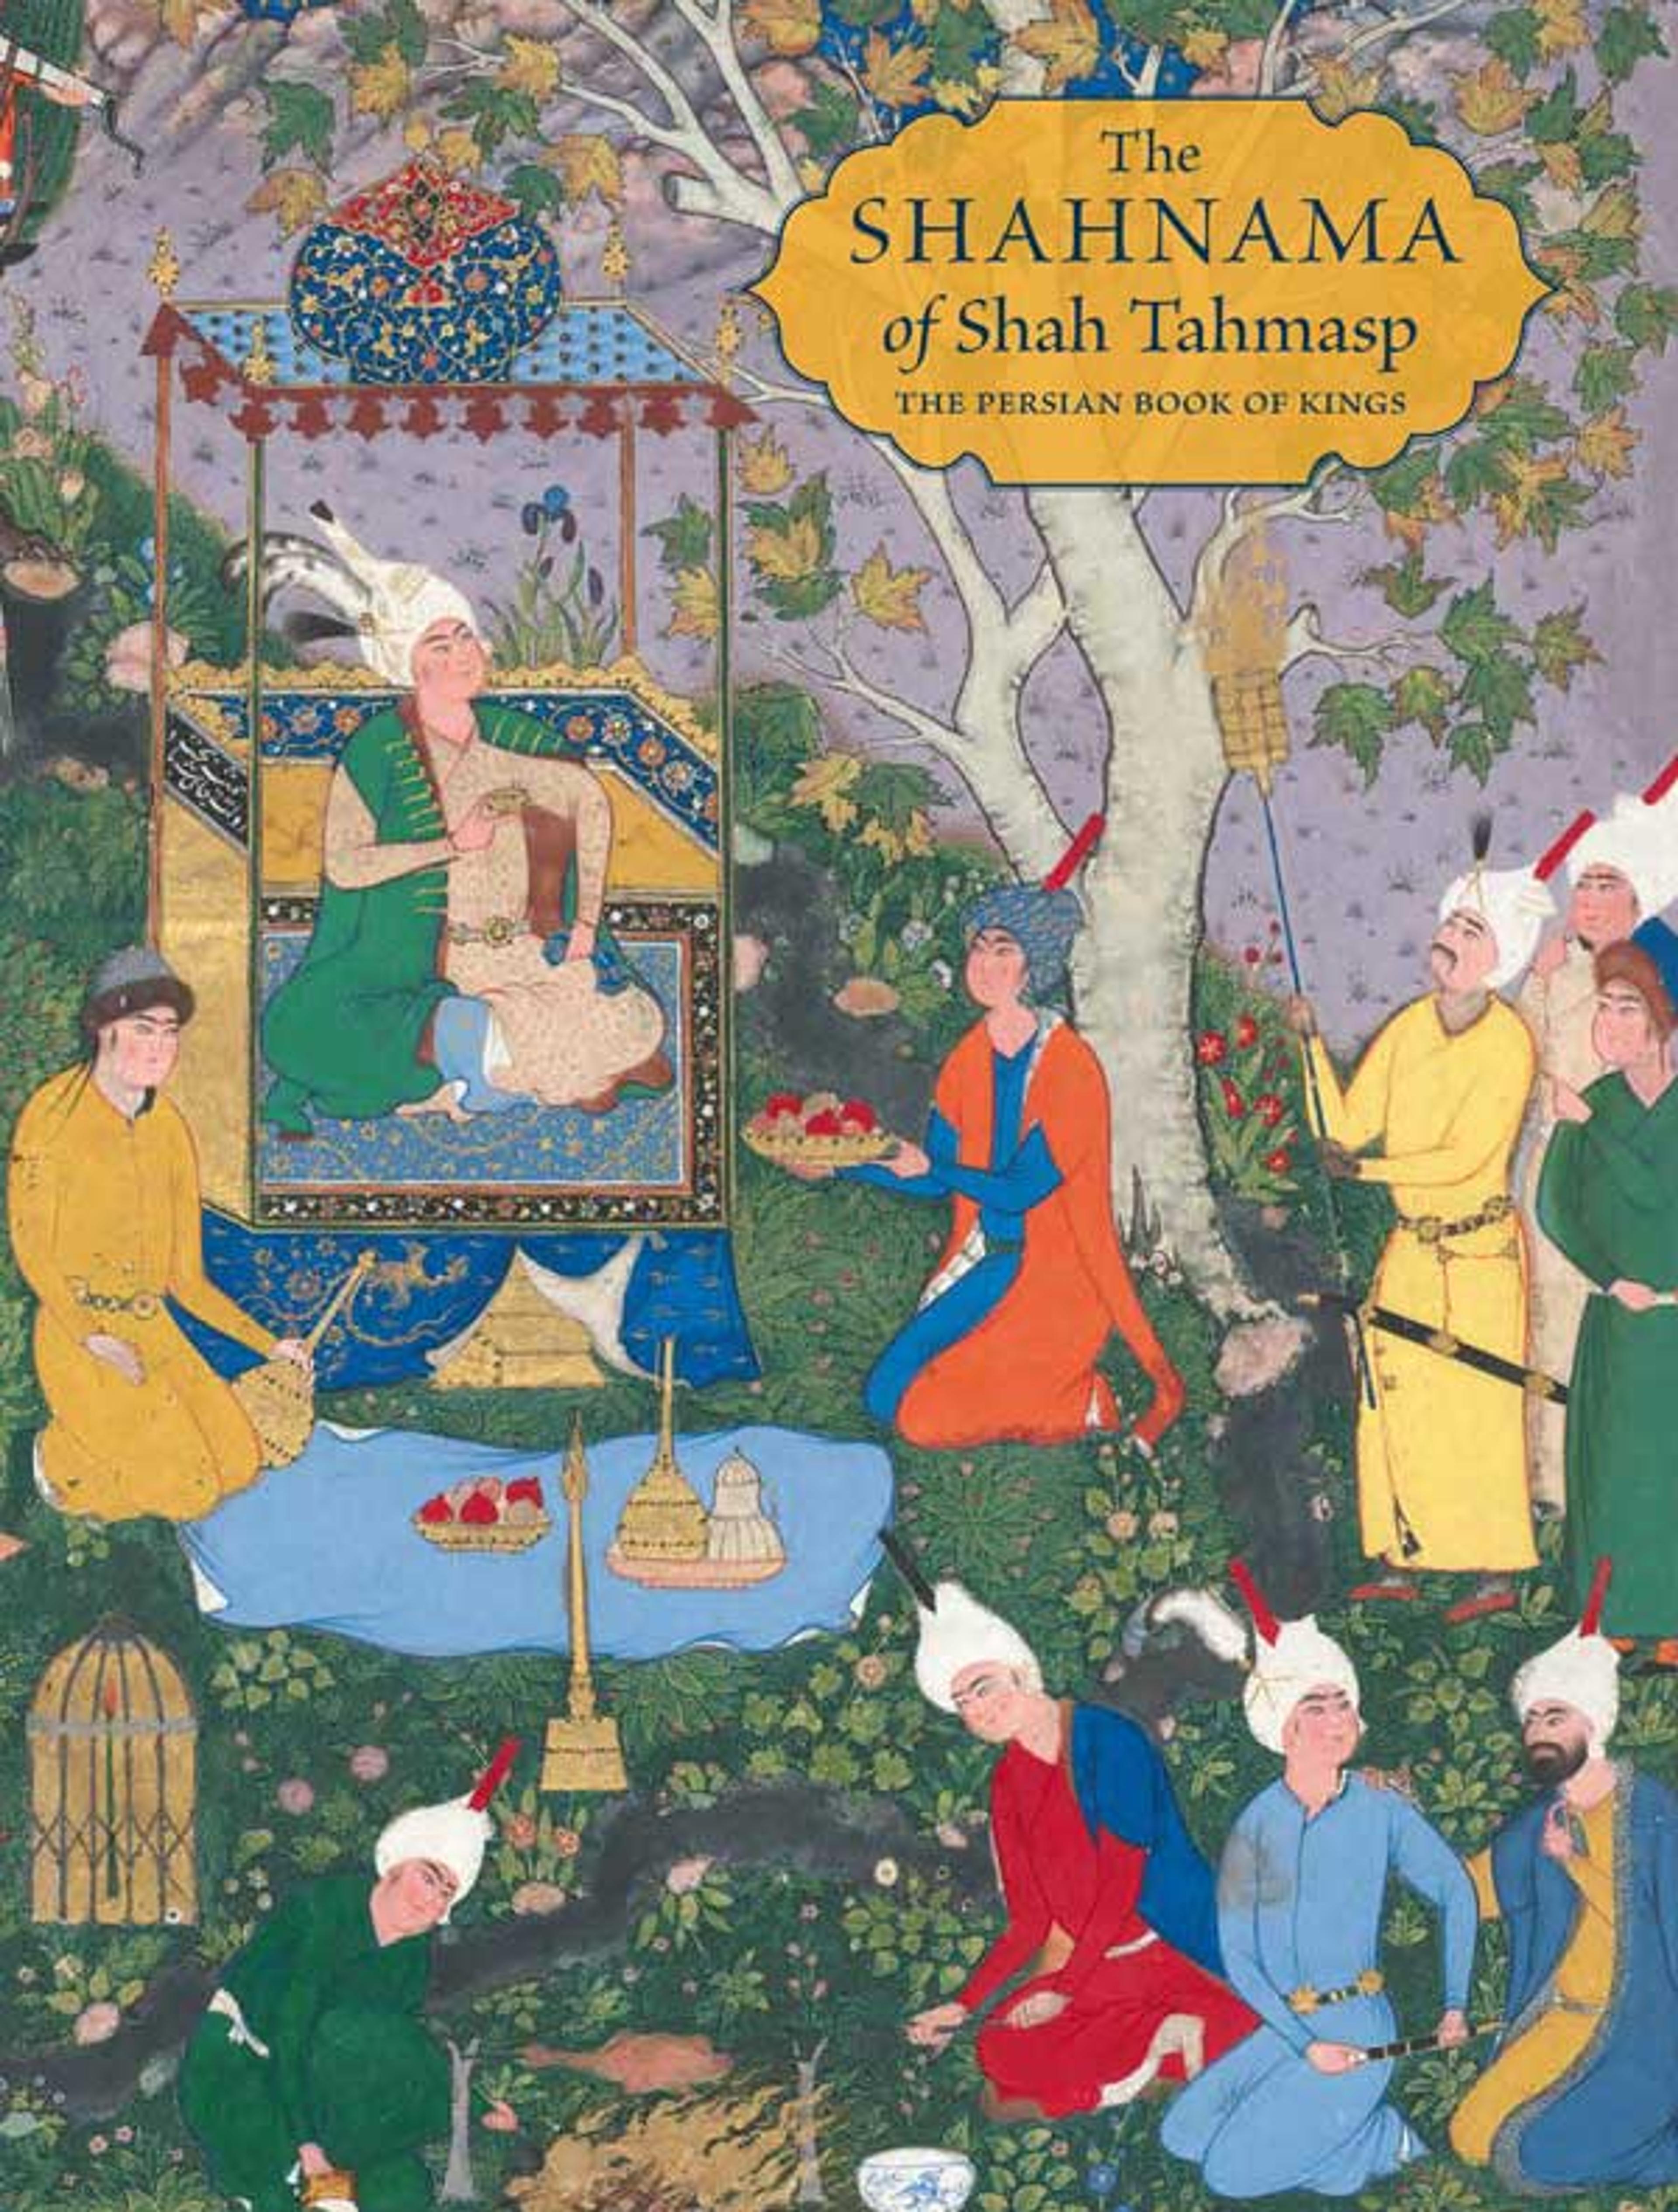 The Shahnama of Shah Tahmasp, by Sheila Canby, features 530 full-color illustrations and is available at The Met Store and MetPublications.